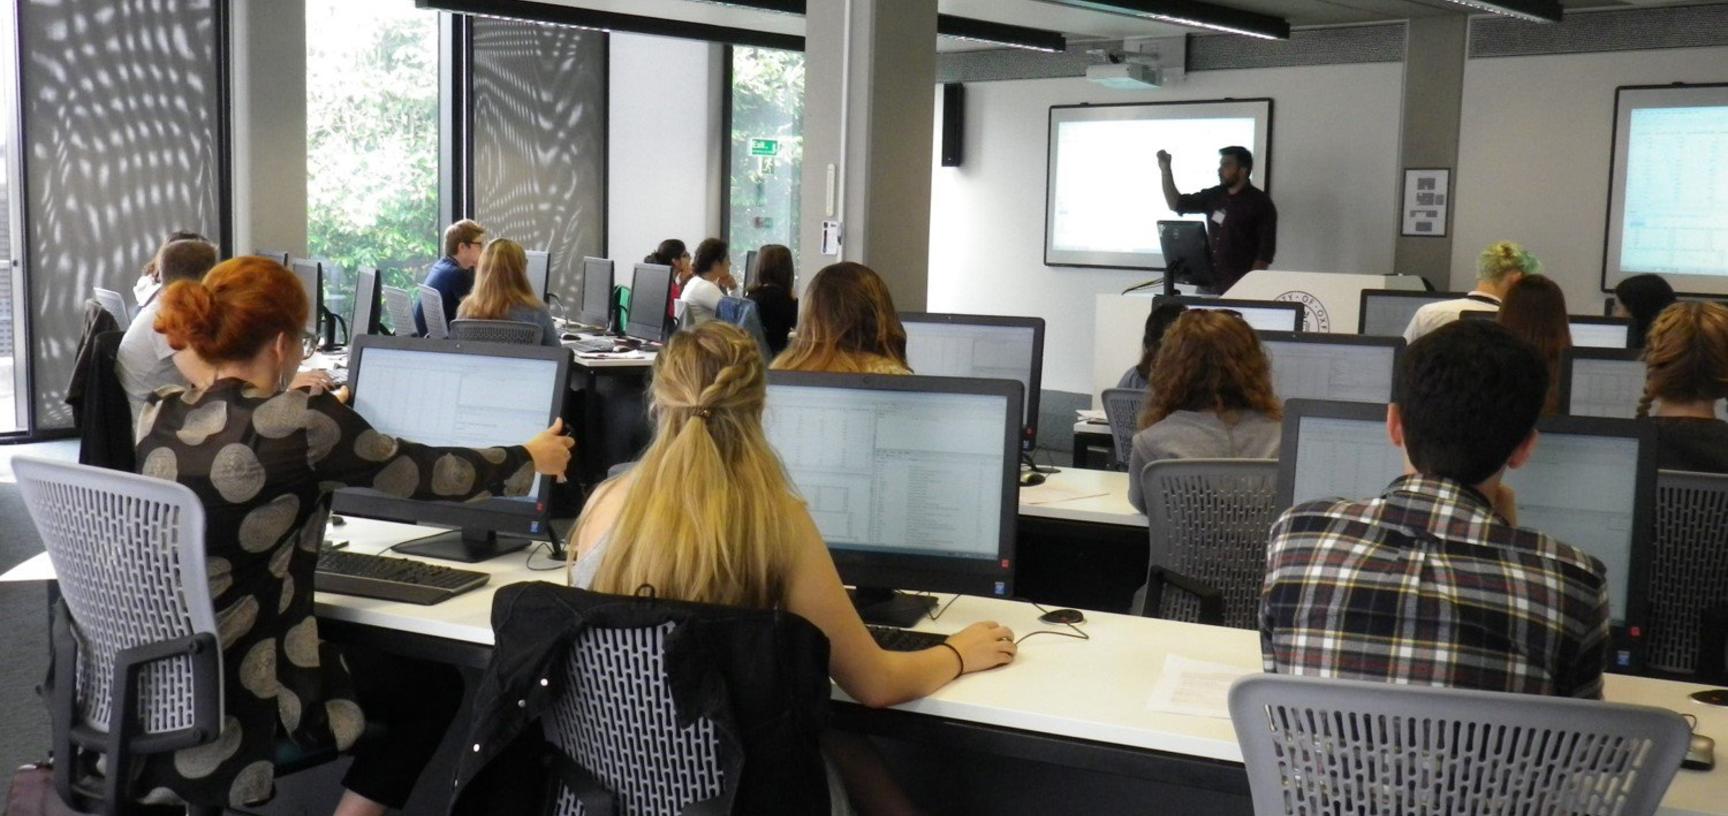 View from the back of computer lab with students in front of desktops and lecturer at the front next to projector screen